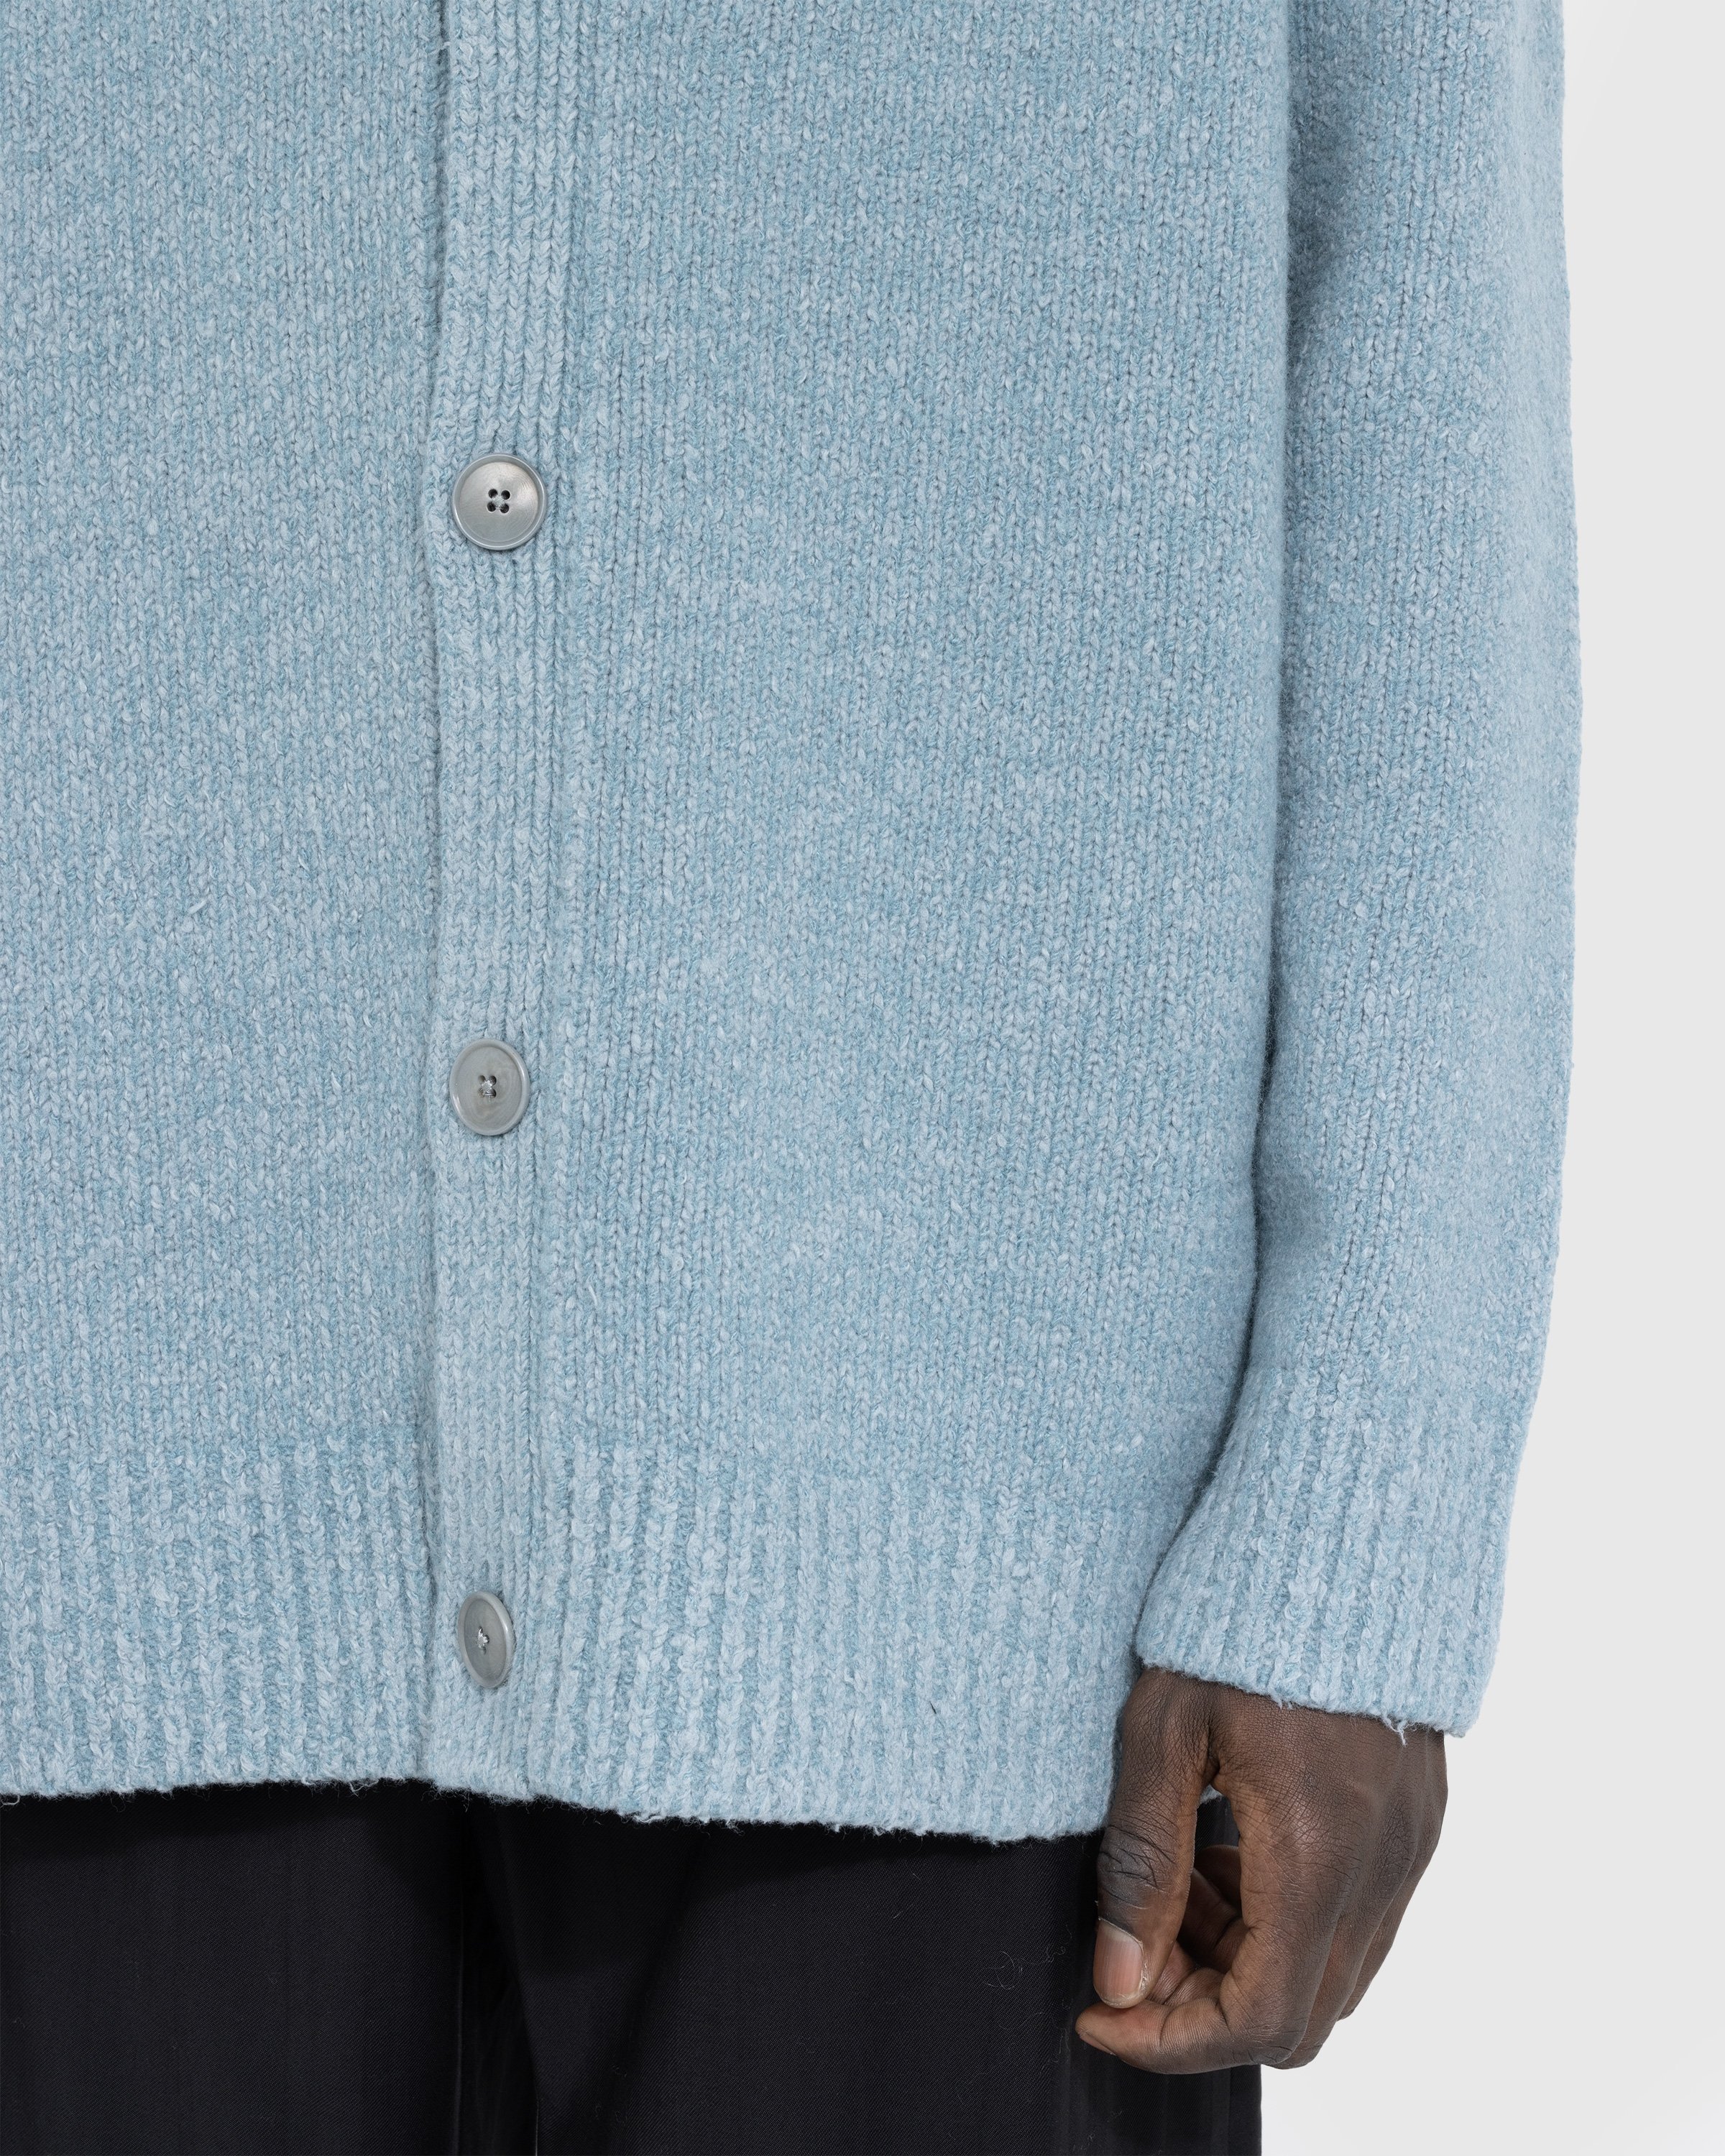 Acne Studios - FN-MN-KNIT000440 - Clothing - Blue - Image 5